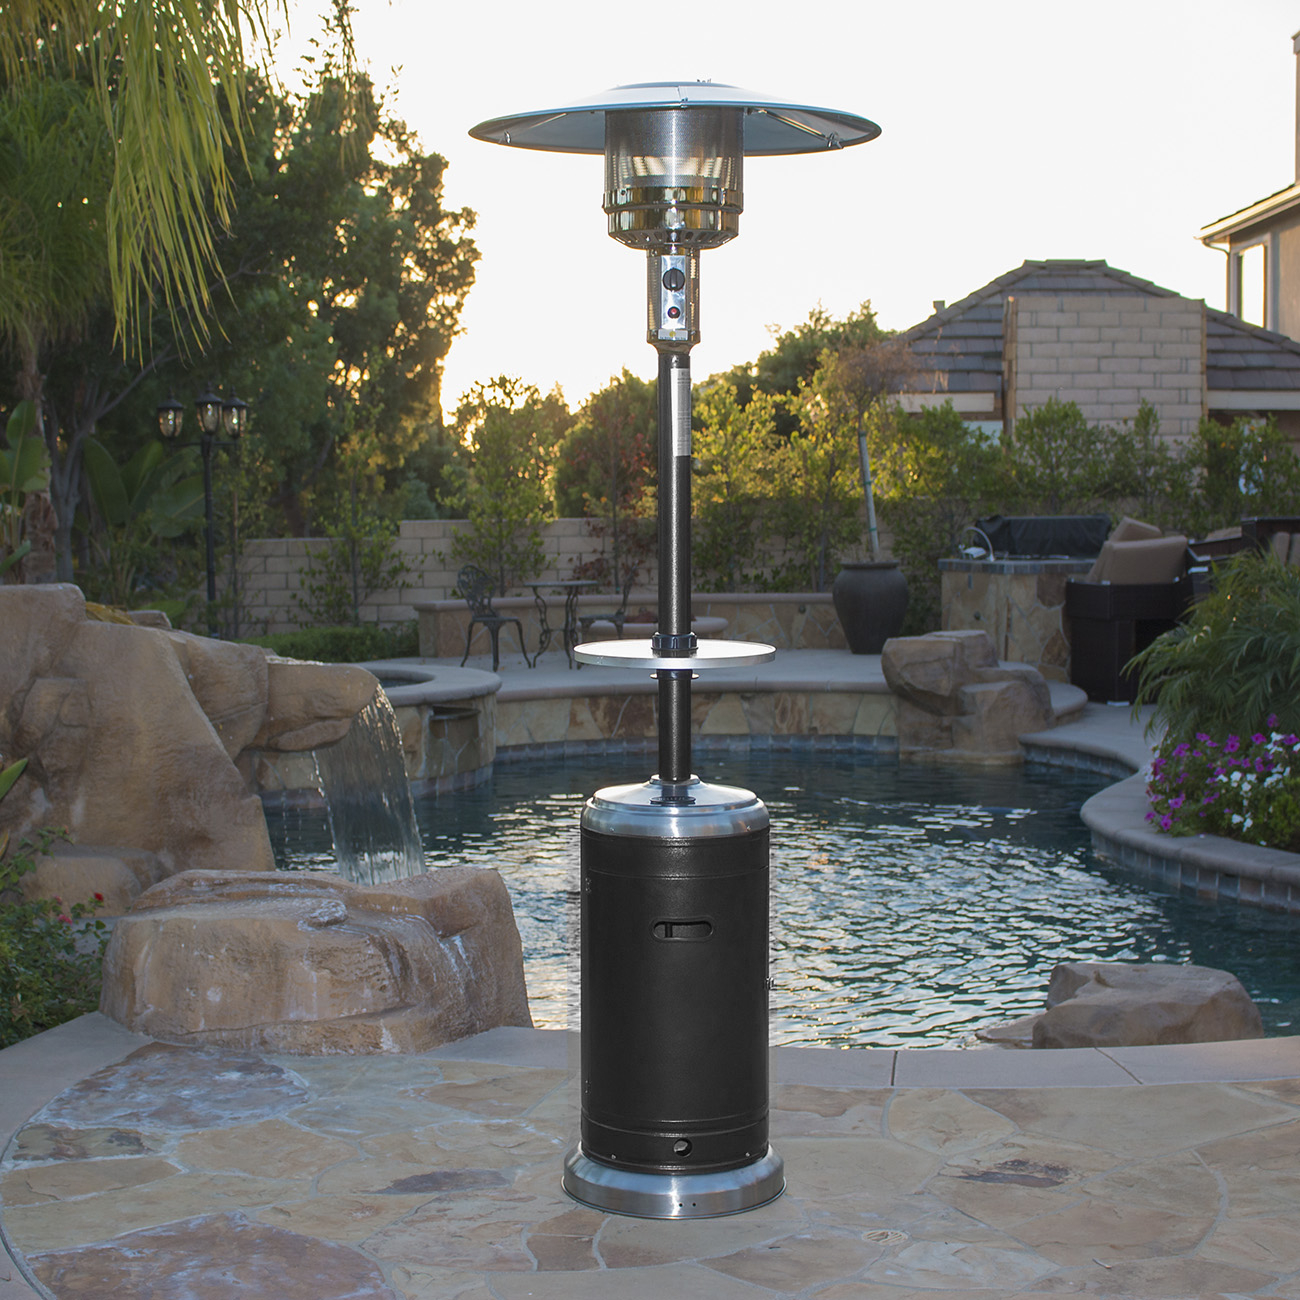 Details About 48000 Btu Black And Stainless Steel Full Size Propane Gas Patio Heater W Table intended for dimensions 1300 X 1300